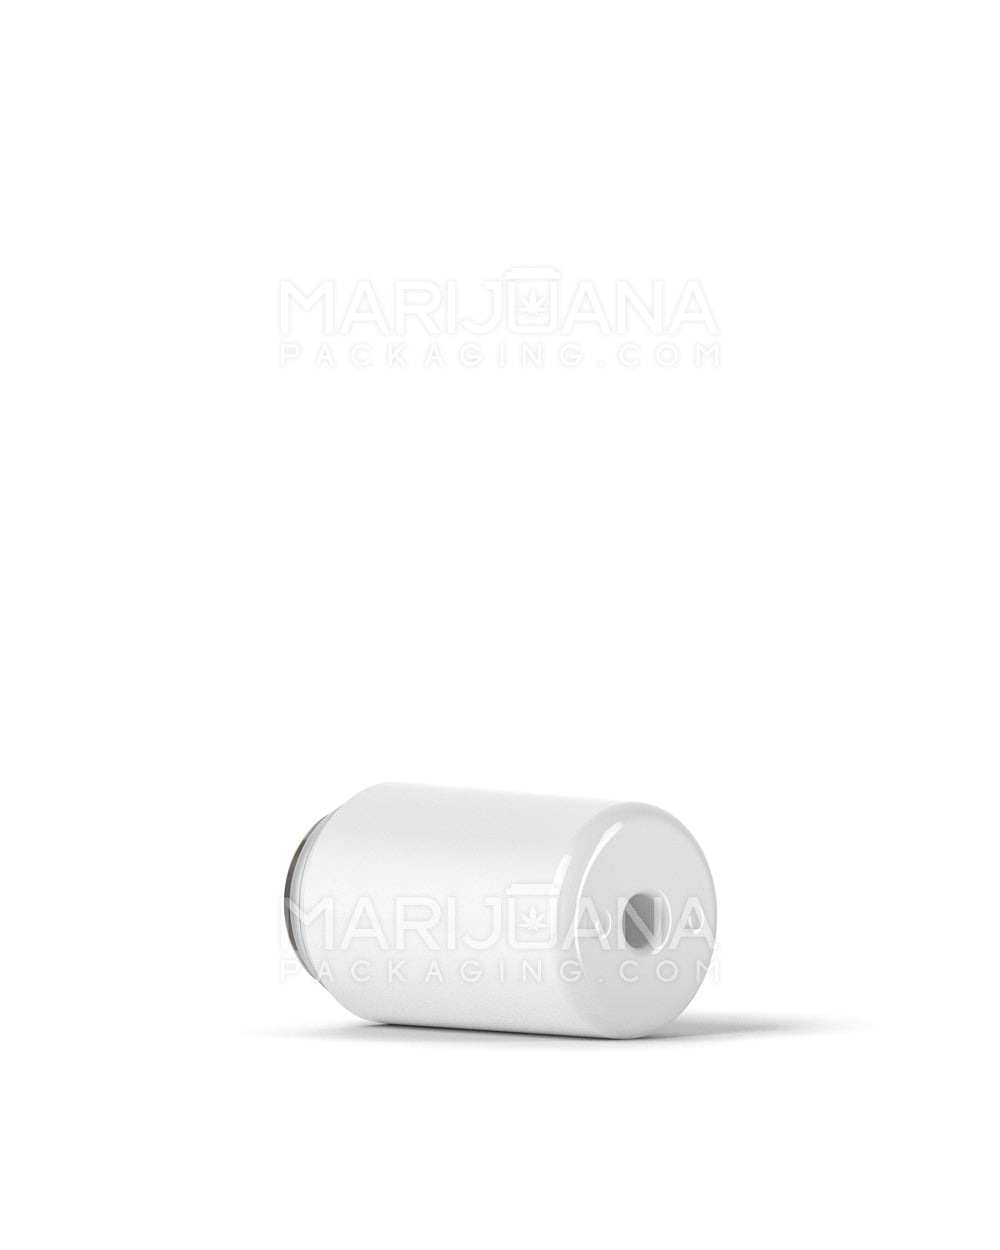 RAE | Round Vape Mouthpiece for Hand Press Plastic Cartridges | White Plastic - Hand Press - 400 Count - 5